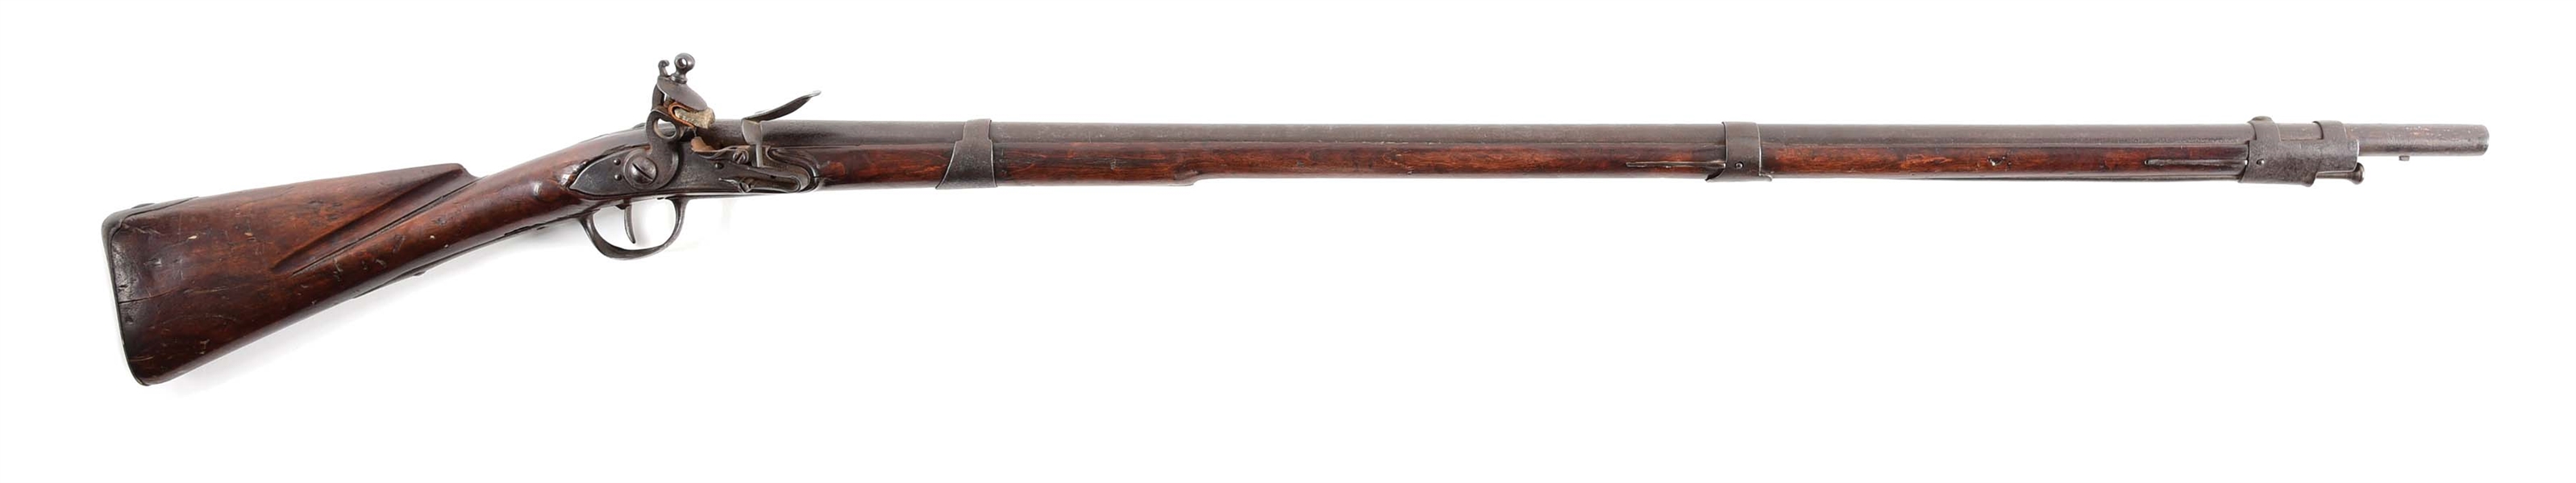 (A) SCARCE AMERICAN RESTOCKED TYPE I MODEL 1763 ST. ETIENNE FLINTLOCK MUSKET WITH DEFACED NEW HAMPSHIRE MARKINGS.